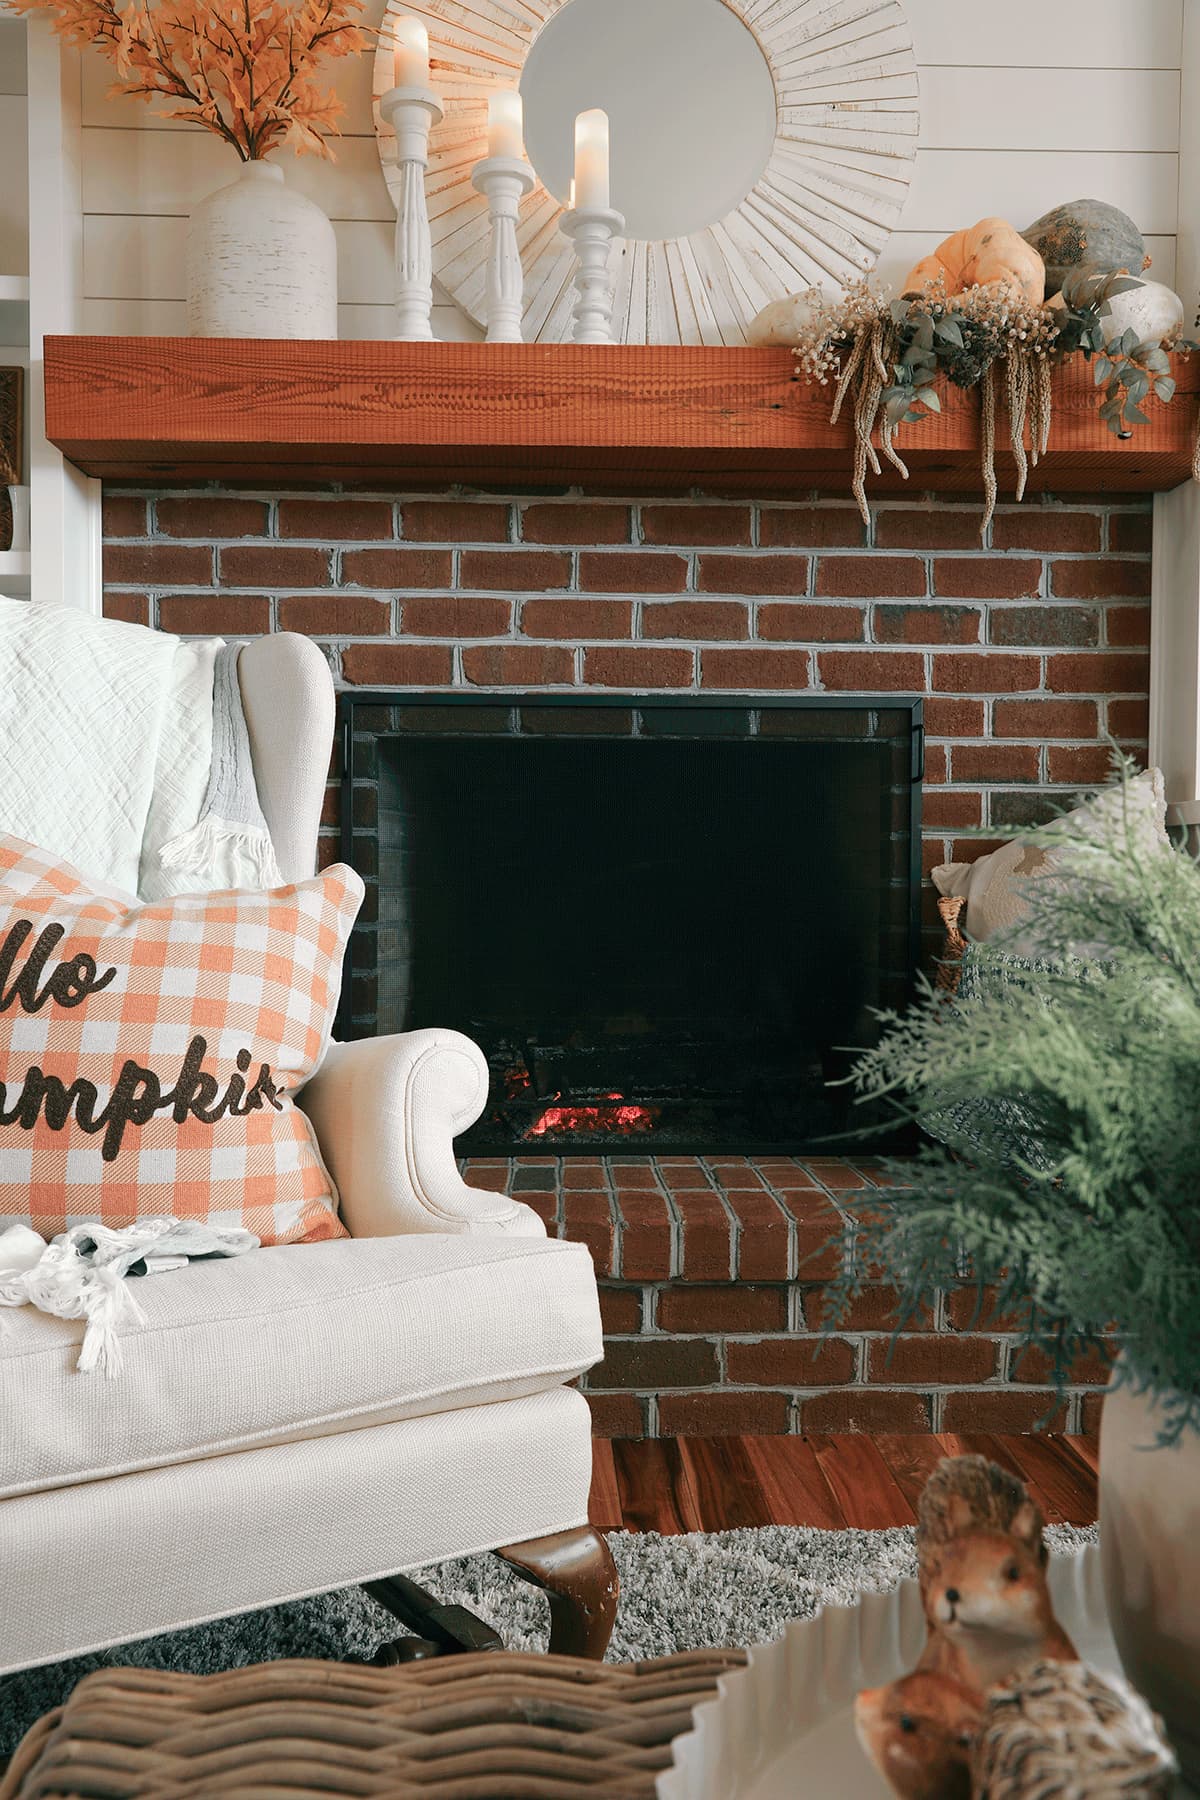 Fall Living Room Decor: With Hints of Coastal Elements